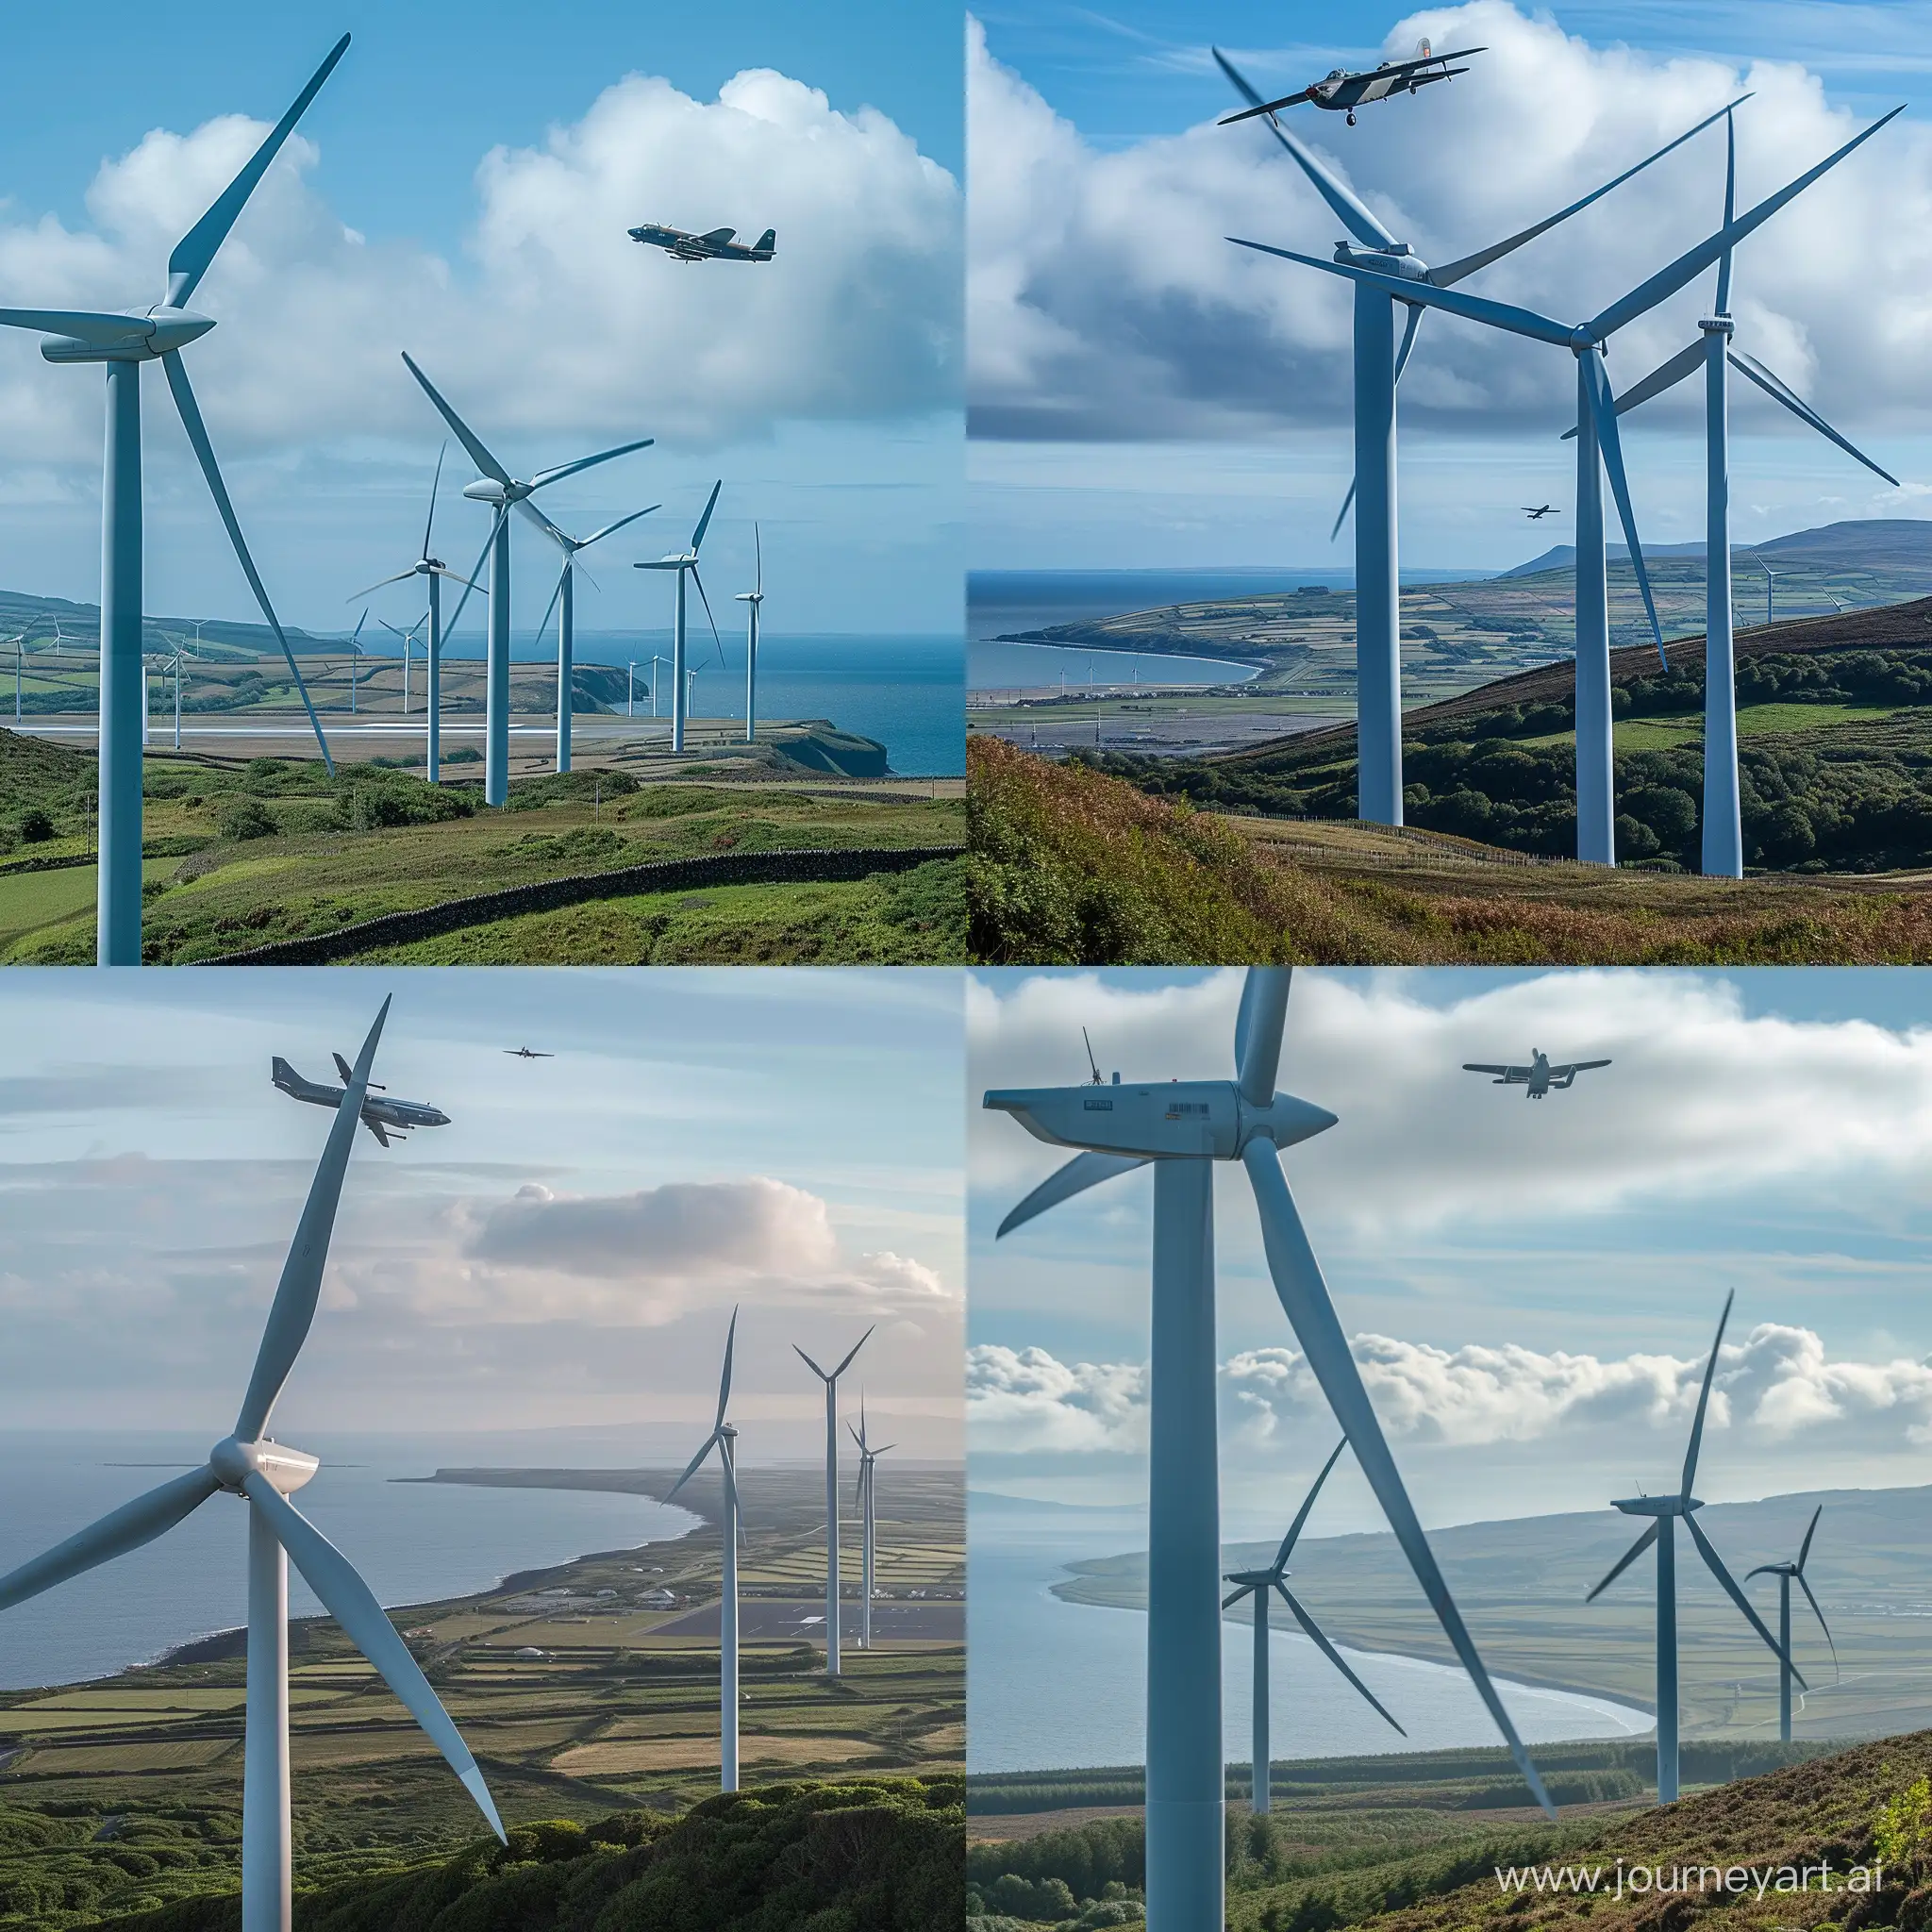 Valley of UK Wind turbines facing the sea with a British RAF air field in the background with a Military aeroplane flying in the sky